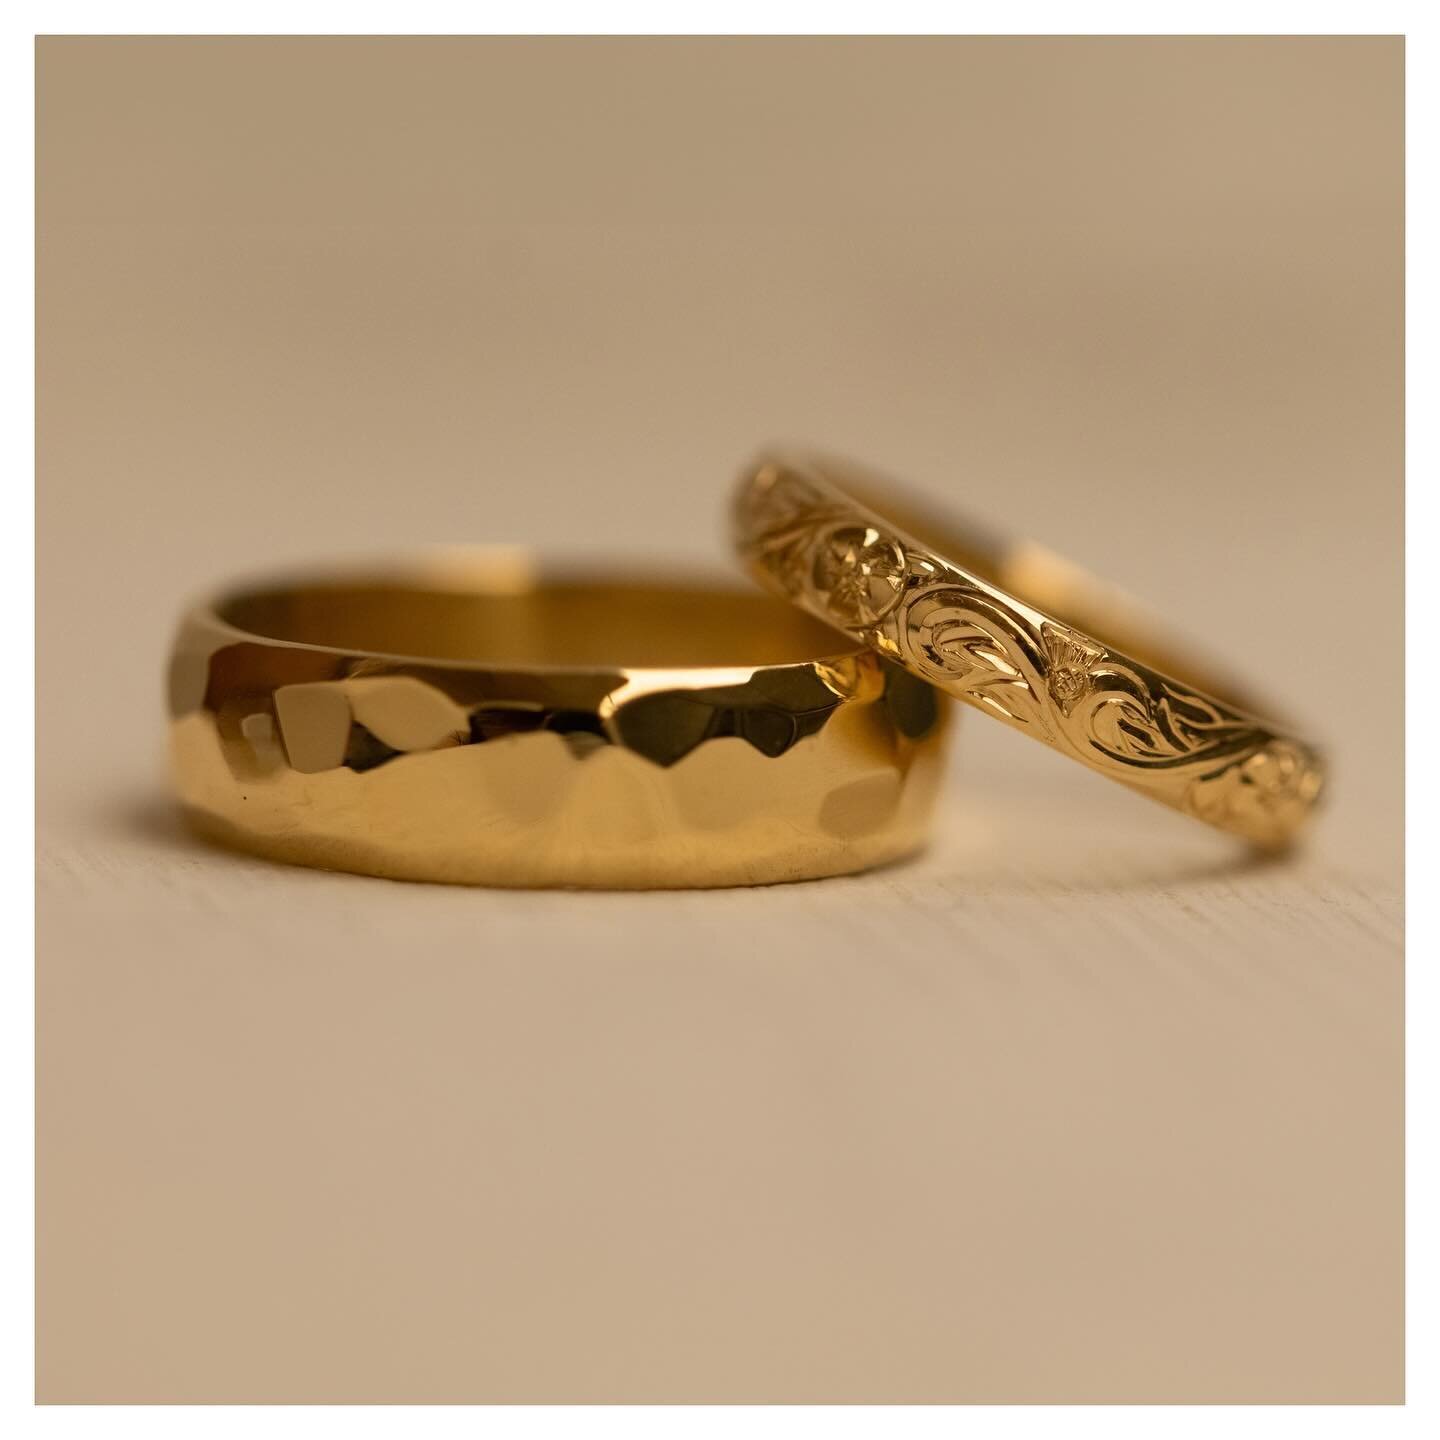 These rings were hand made by @_drewforsyth &amp; Helena last July. They will always be up there as some of my favourite rings ever created on our make your own wedding ring workshop. You can&rsquo;t beat buttery 18ct gold and hand engraving in my ey